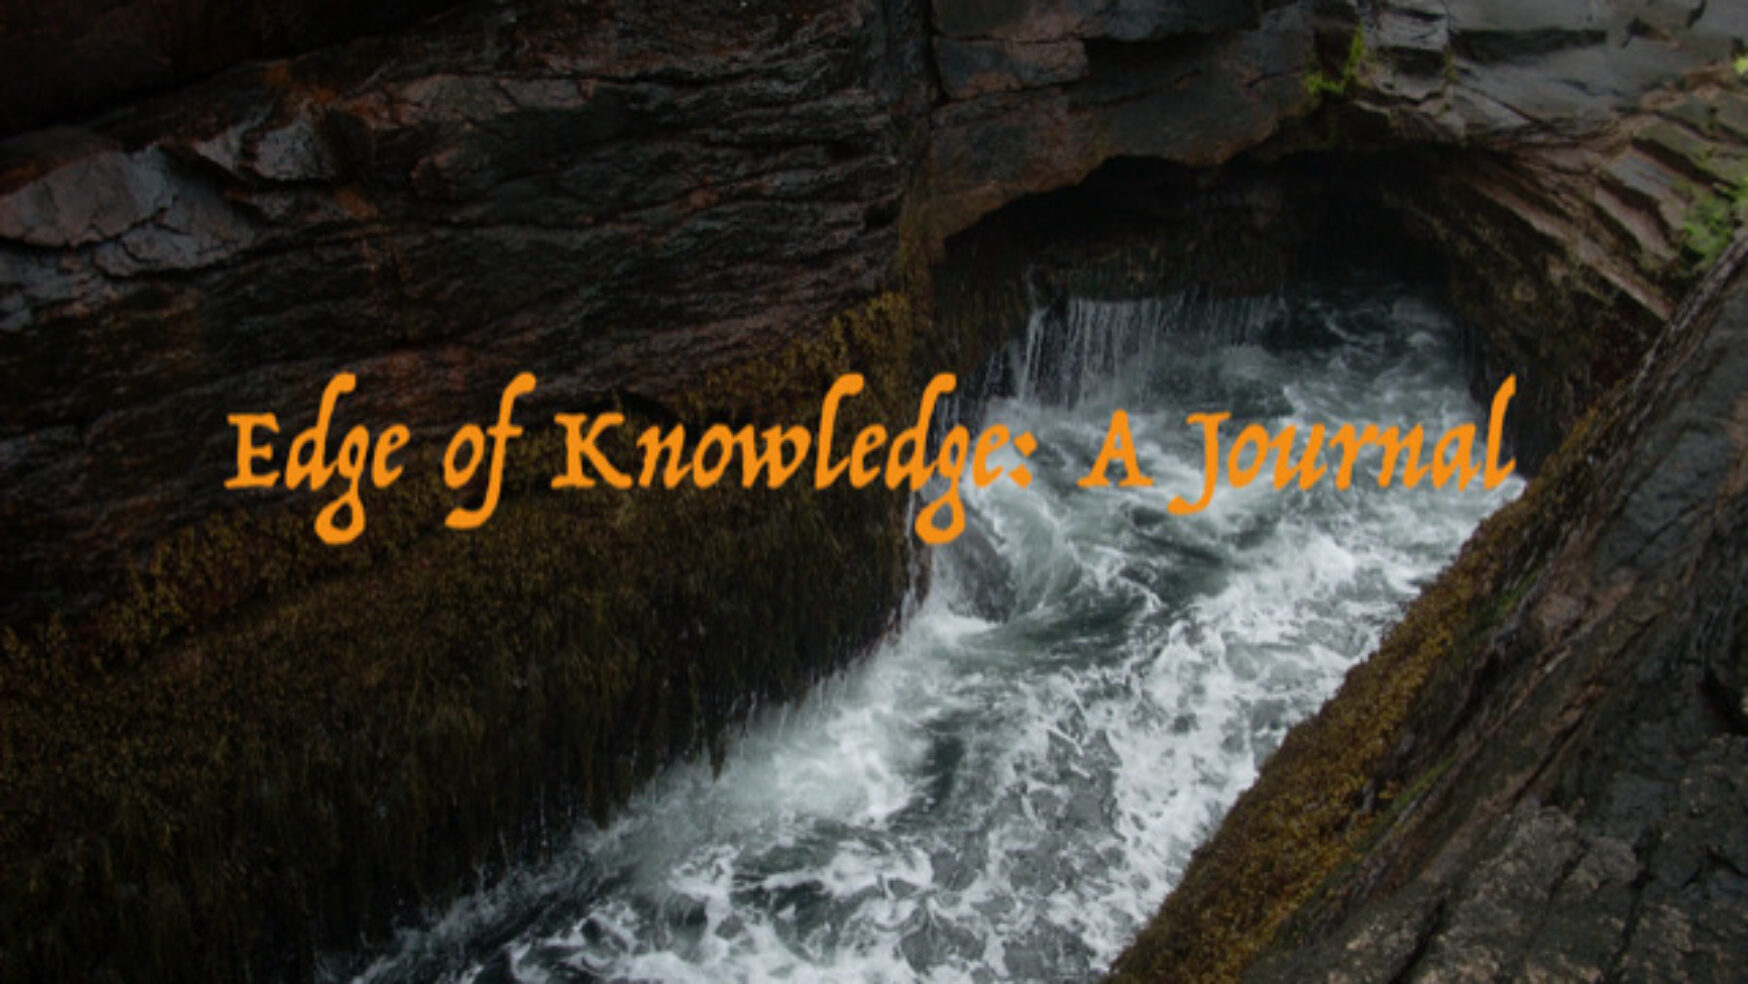 At the Edge of Knowledge: The Future of Professional Psychology